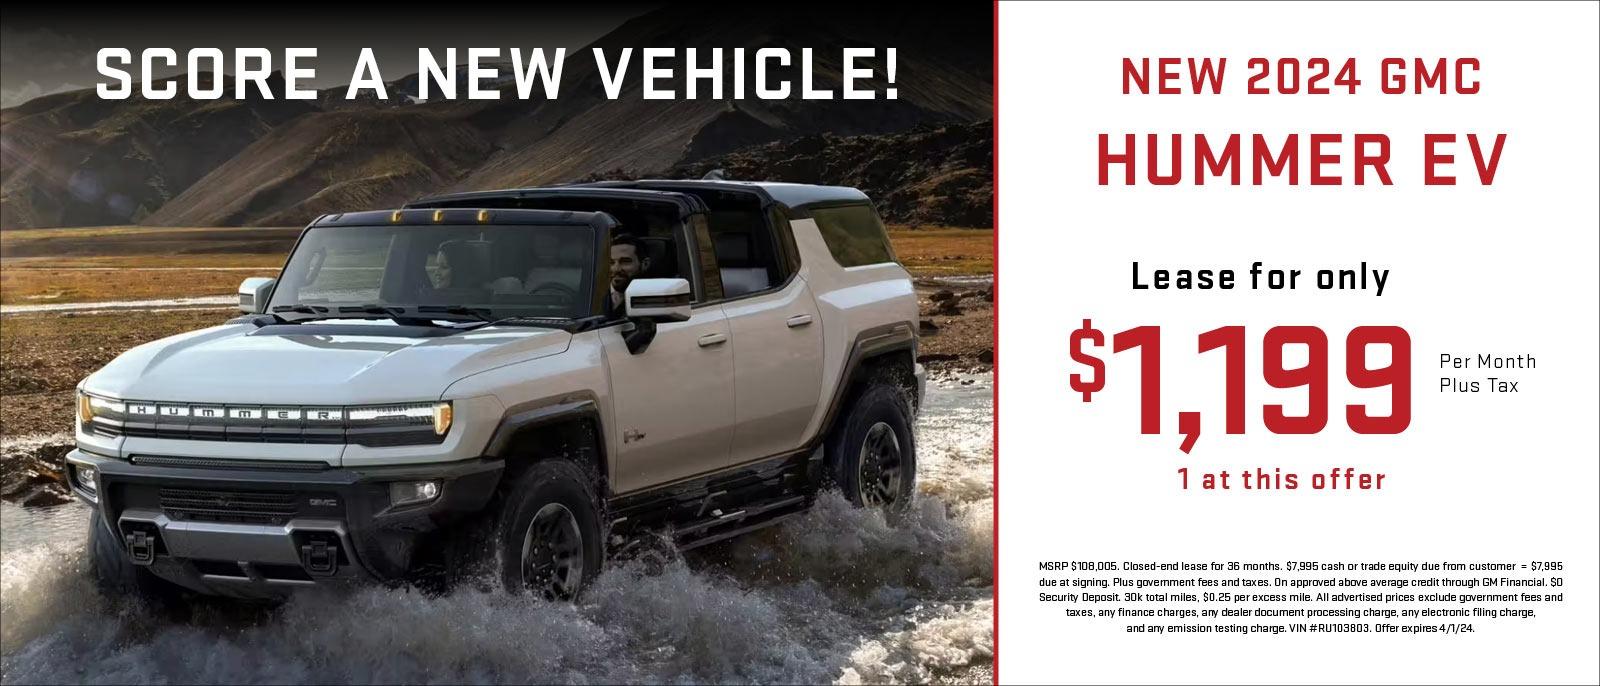 New 2024 GMC Hummer EV
Lease for only 1,199 per month plus tax. 
1 at this offer